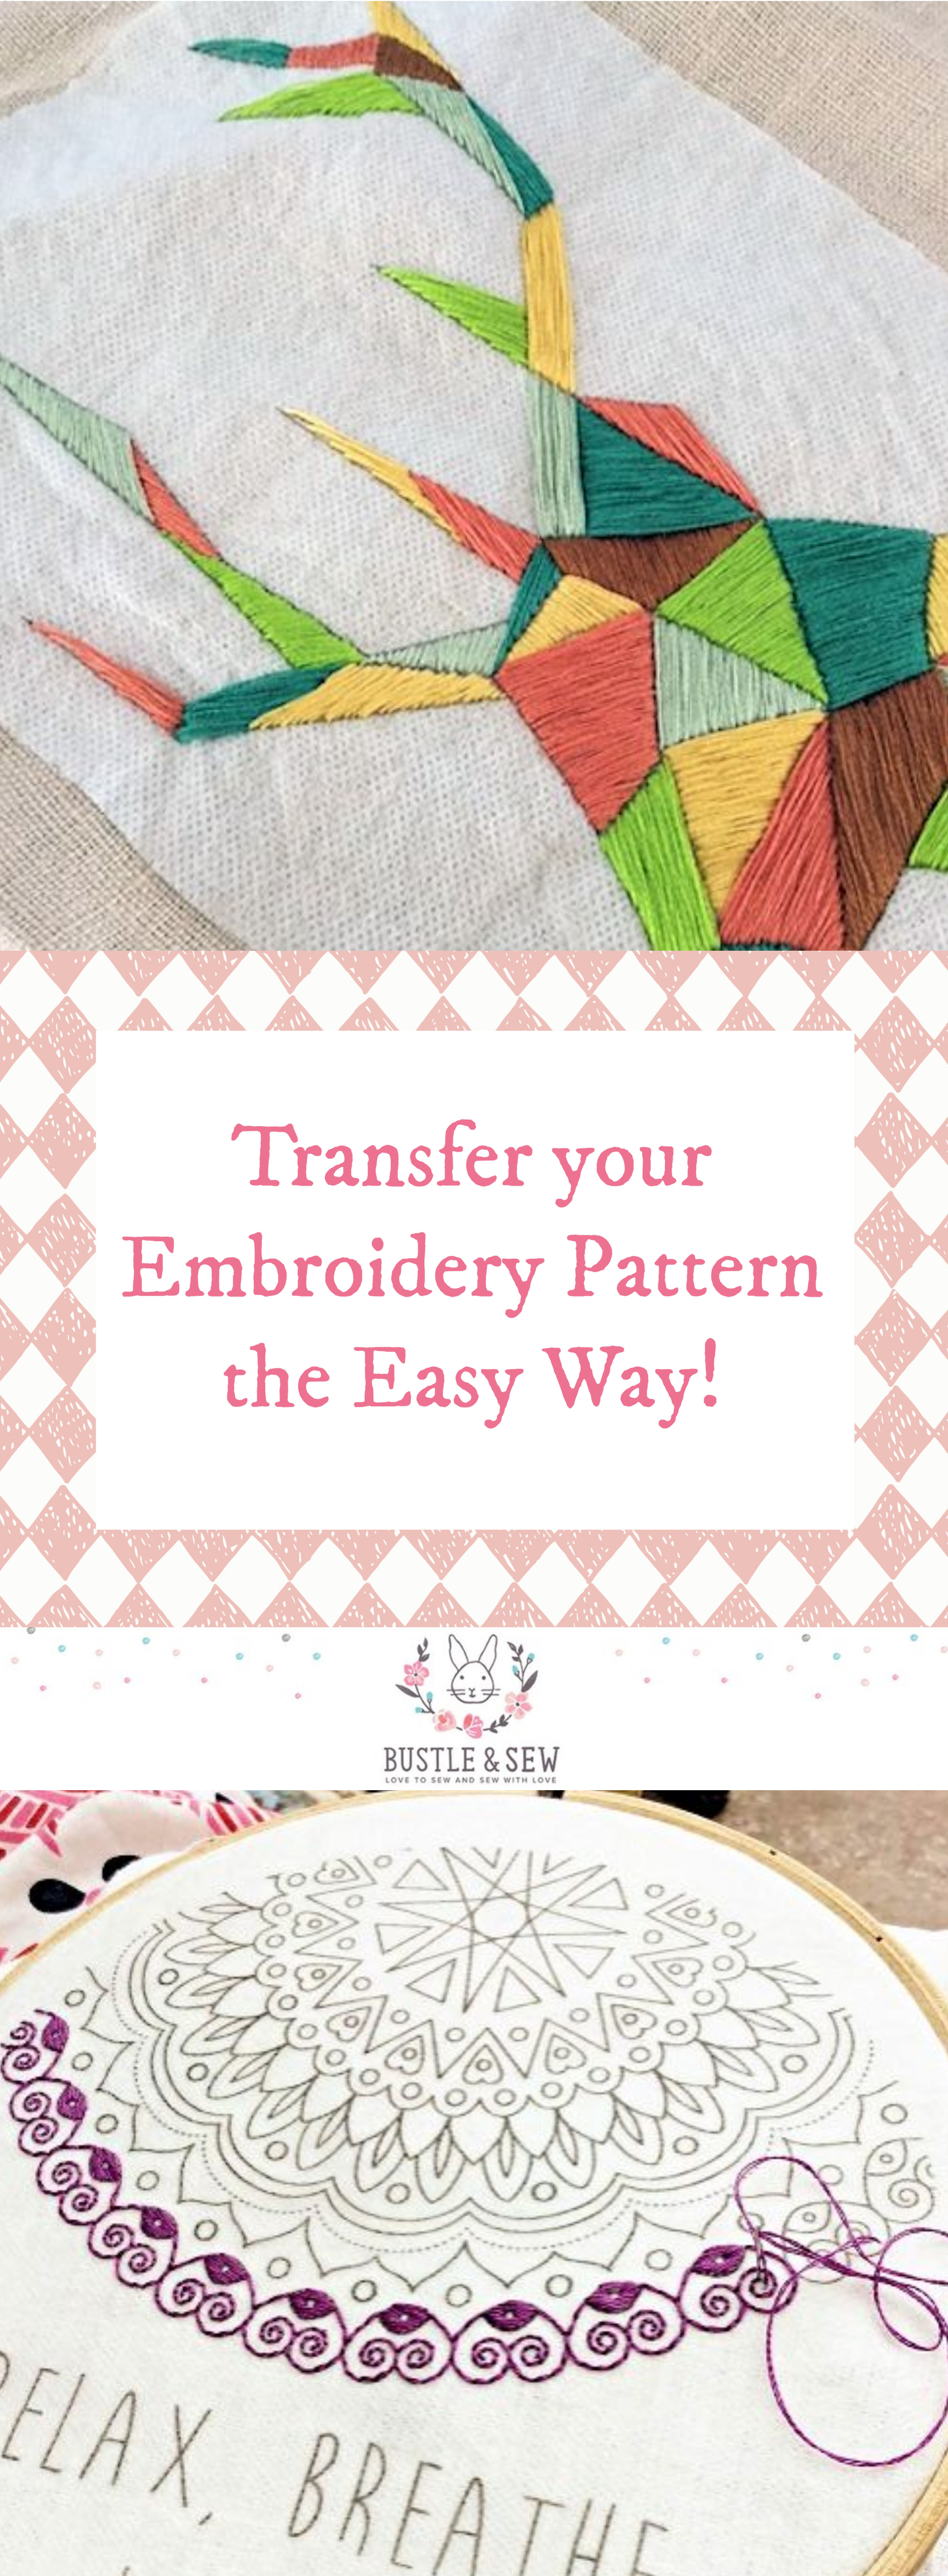 Transfer Patterns For Hand Embroidery Transferring Your Embroidery Pattern Using Sulky Sticky Fabri Solvy